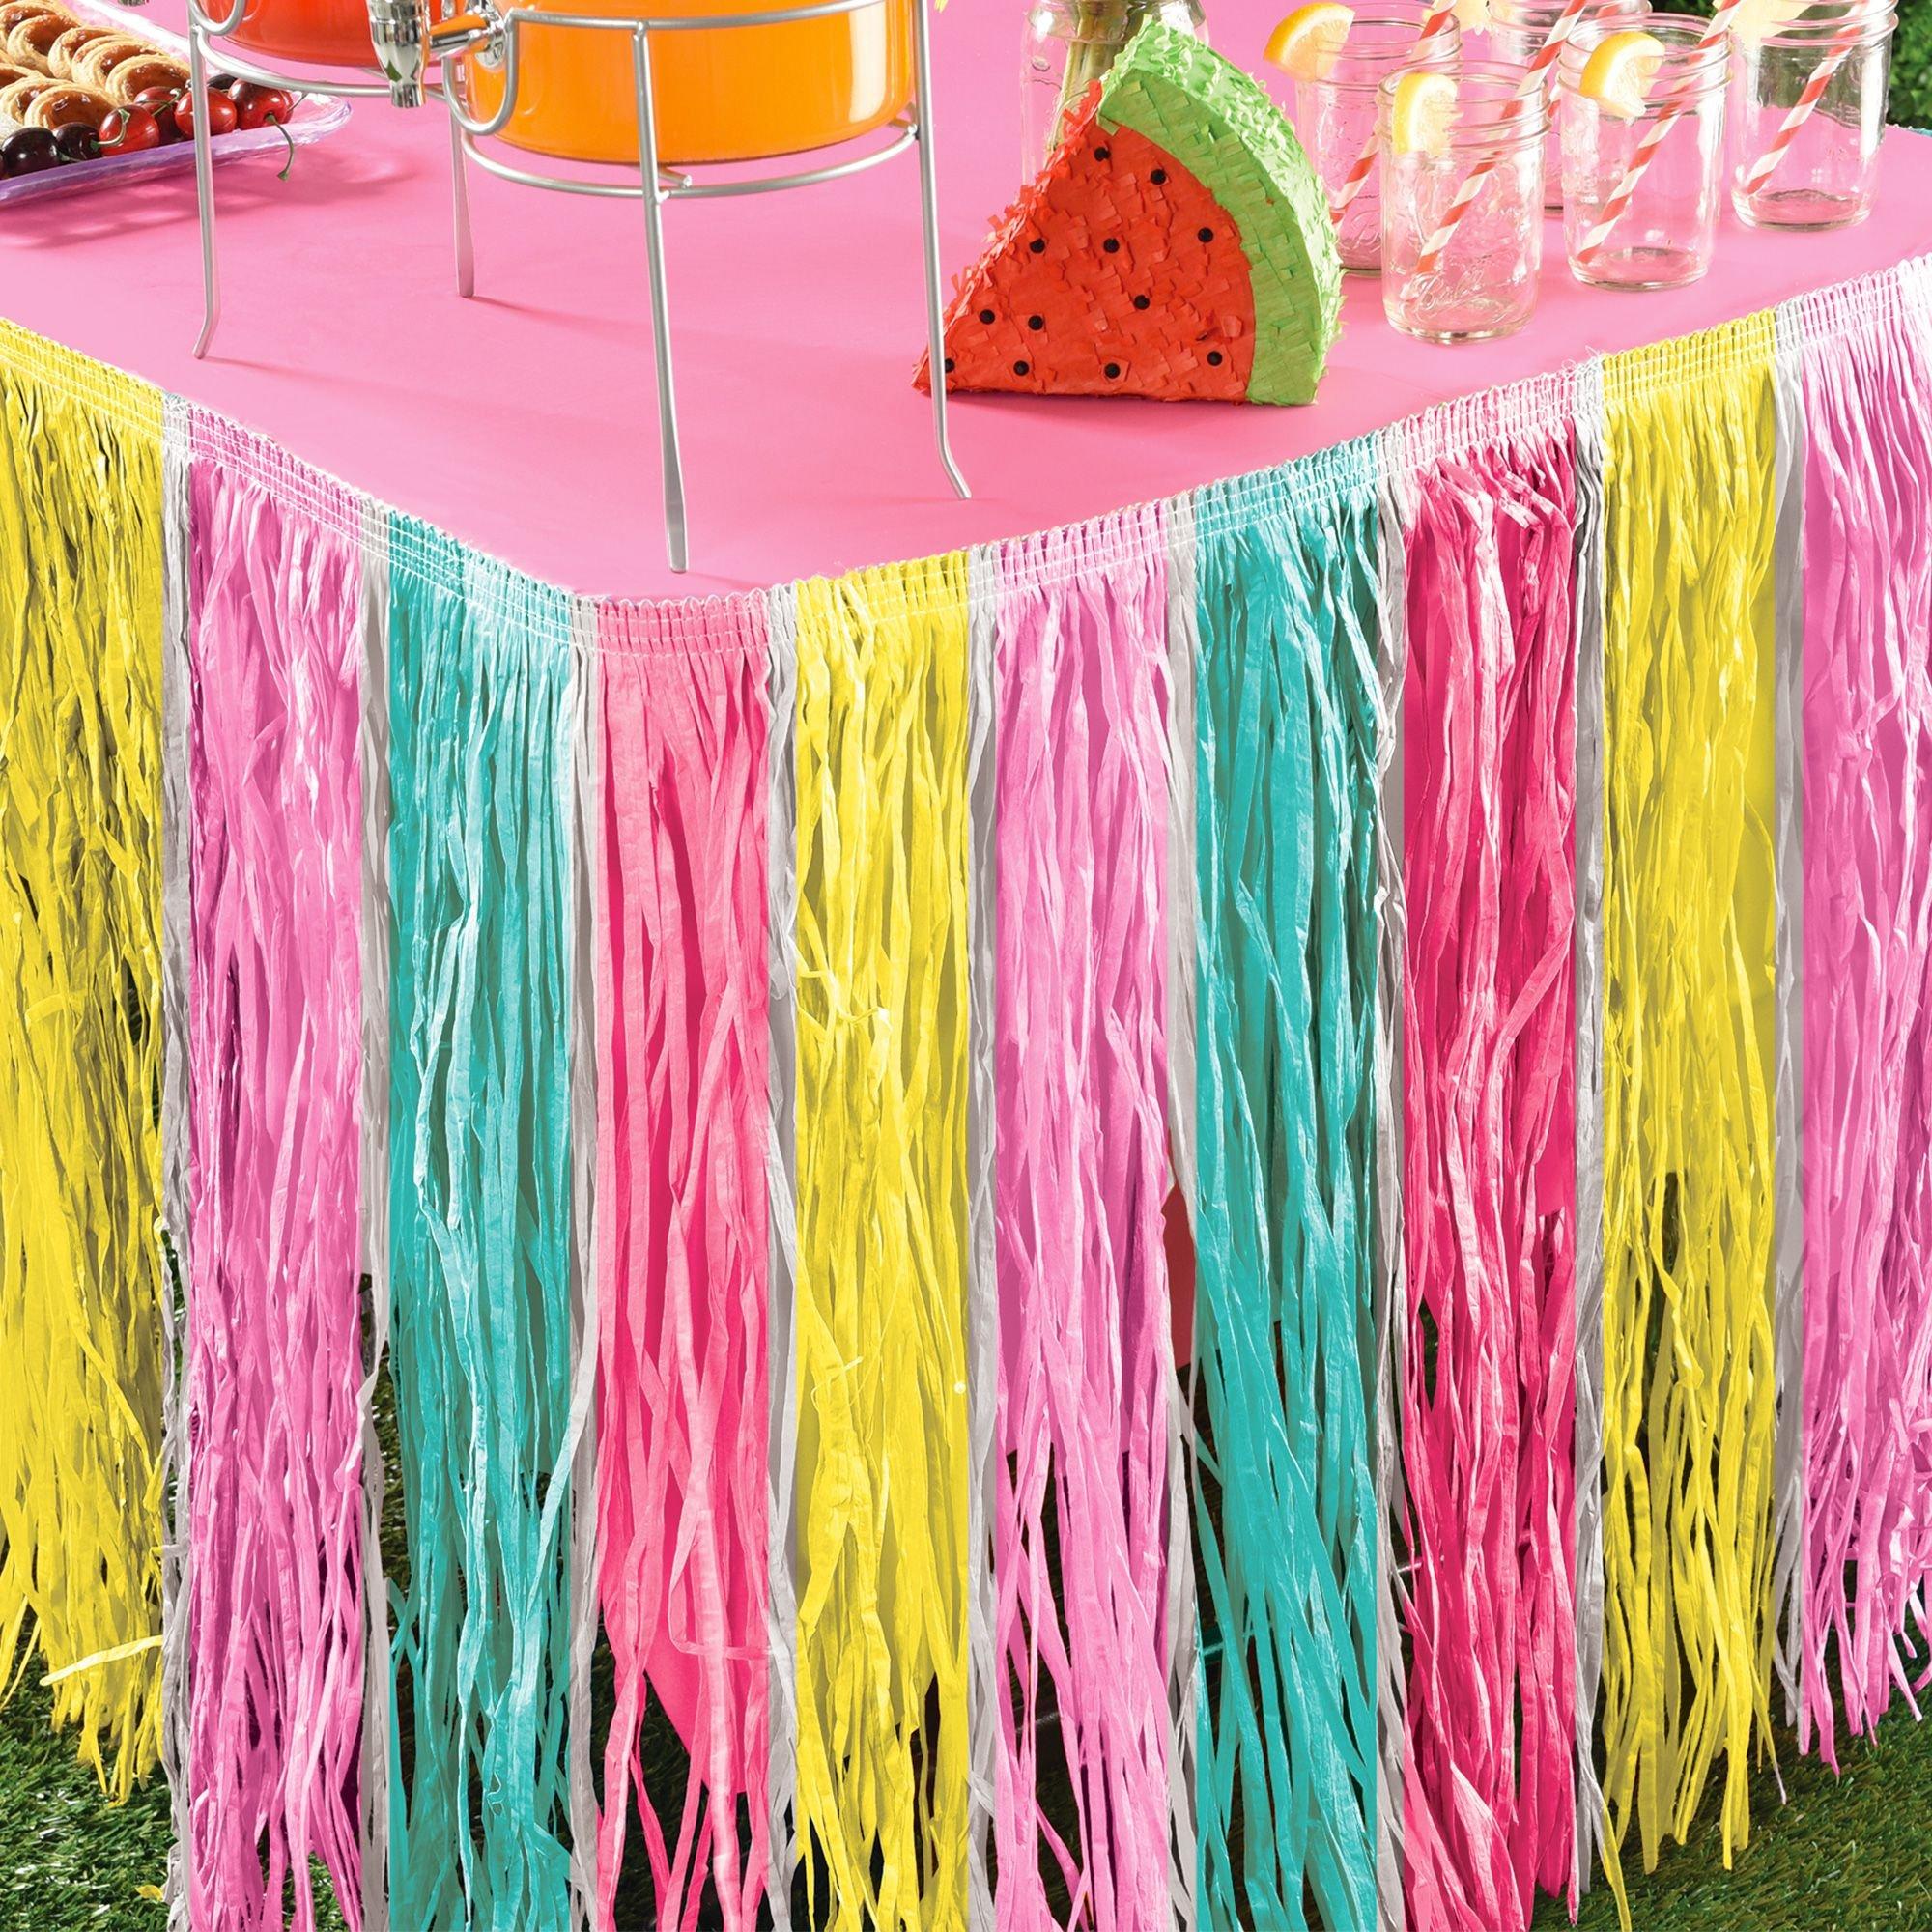 SKD Party by Forum Crepe Paper Folds 20 in. x 8 ft.